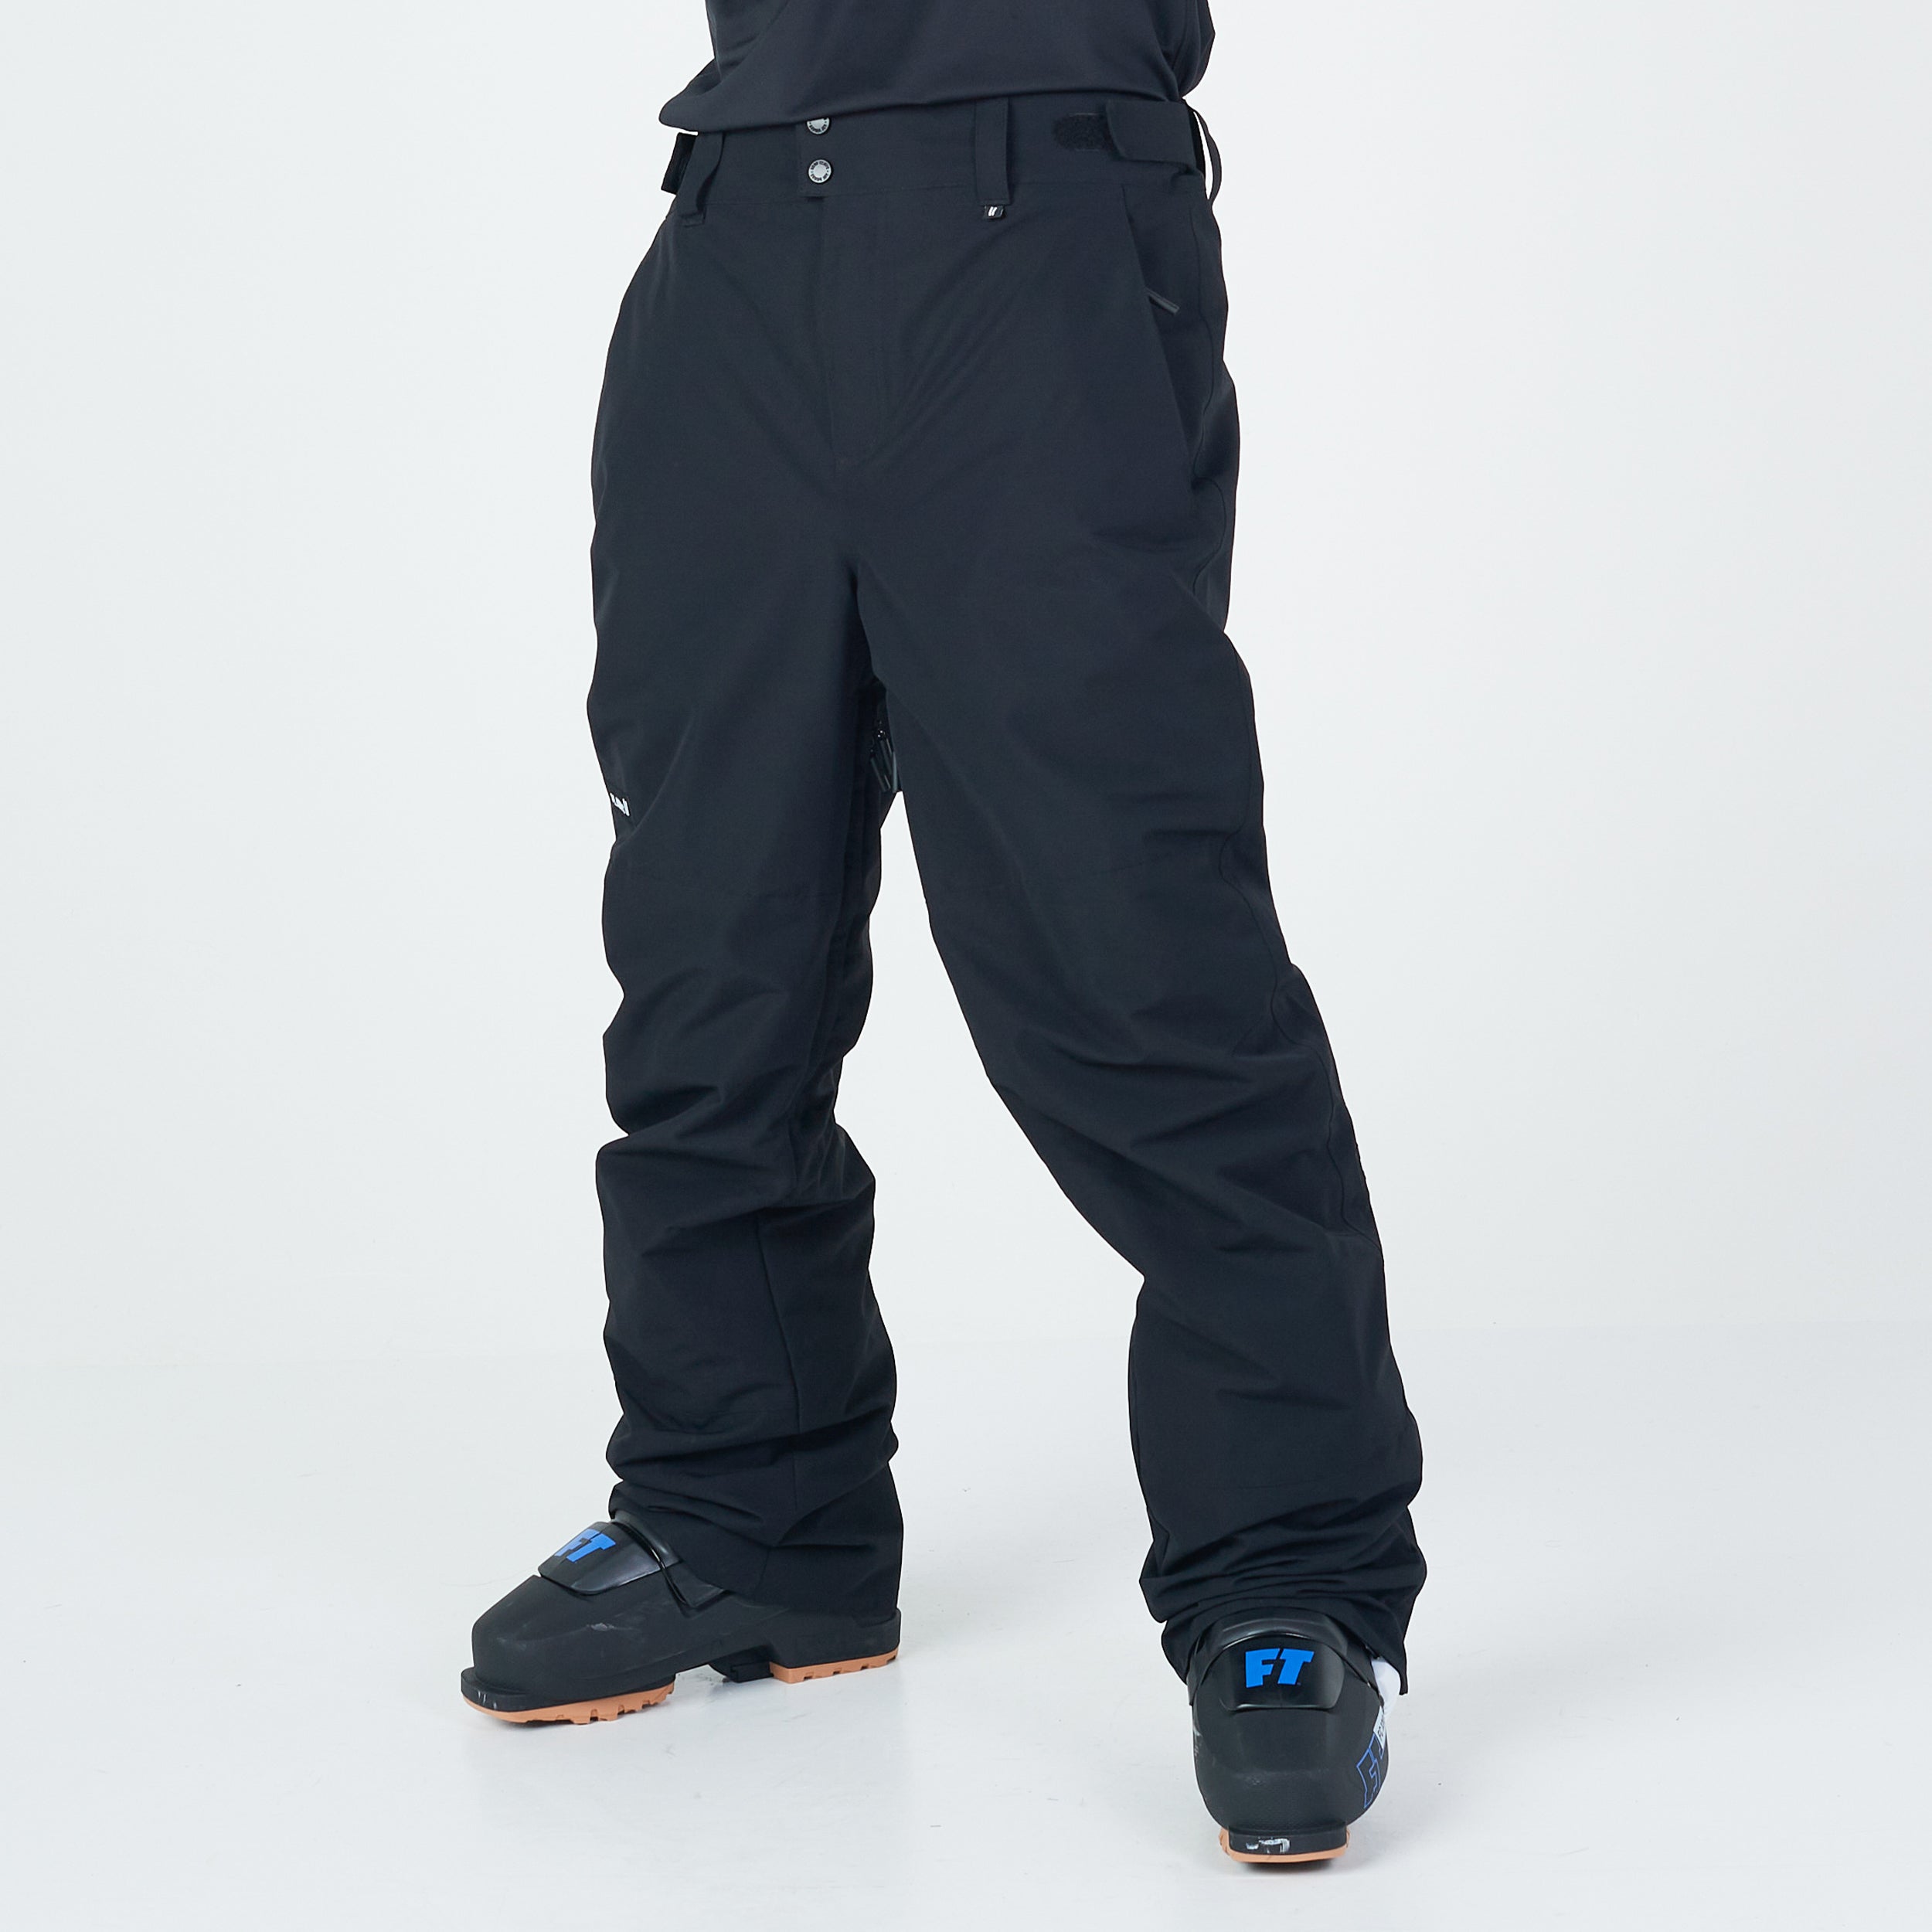 Men's Easy Rider Pant – Planks® - Skiwear, Clothing & Accessories